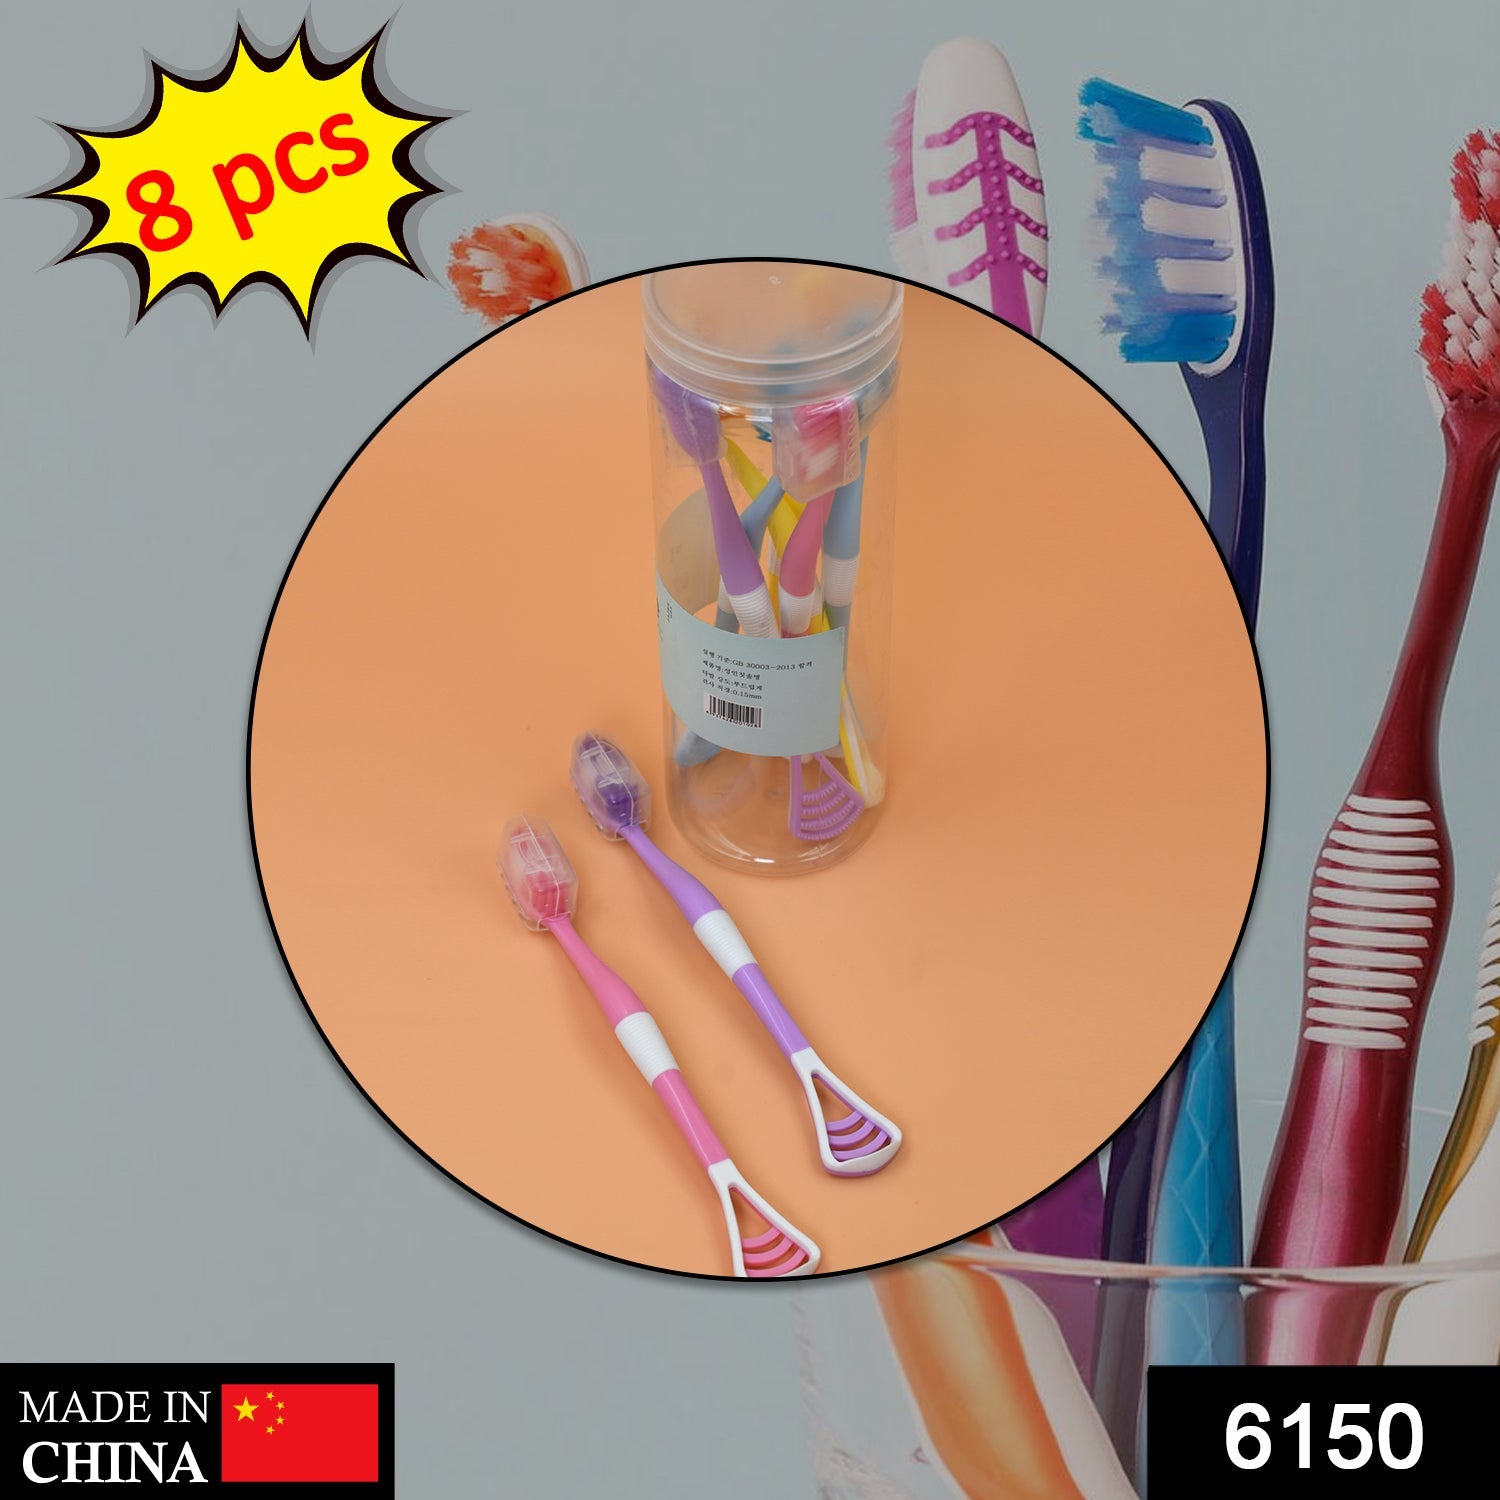 6150 8 Pc 2 in 1 Toothbrush Case widely used in all types of bathroom places for holding and storing toothbrushes and toothpastes of all types of family members etc. DeoDap